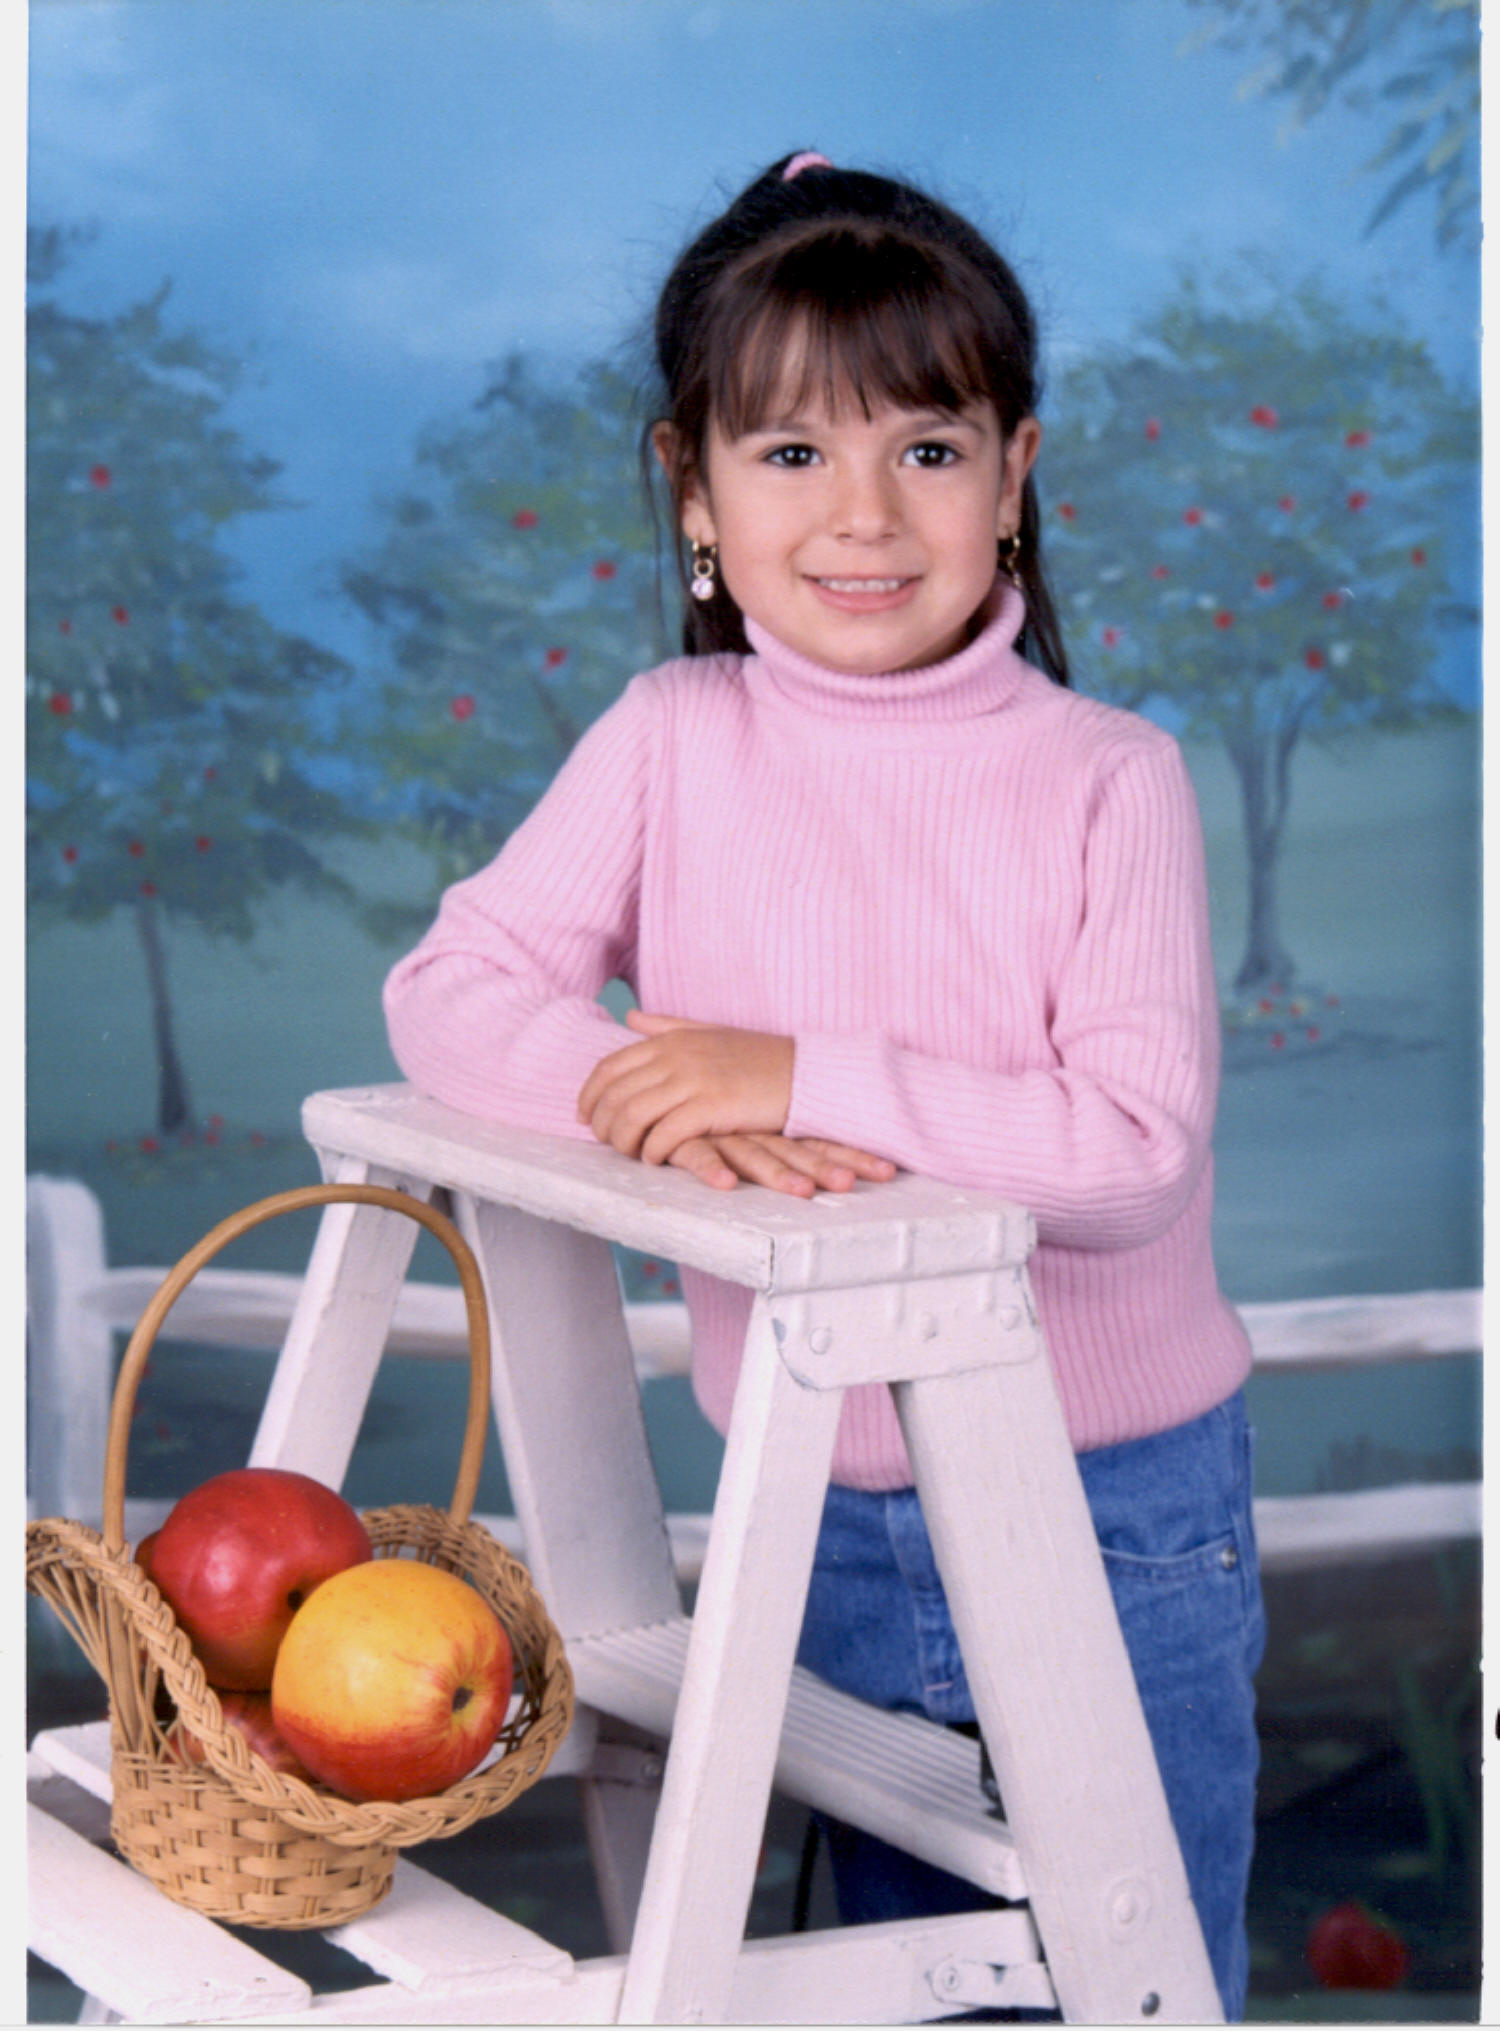 Tips for Photographing School Portraits